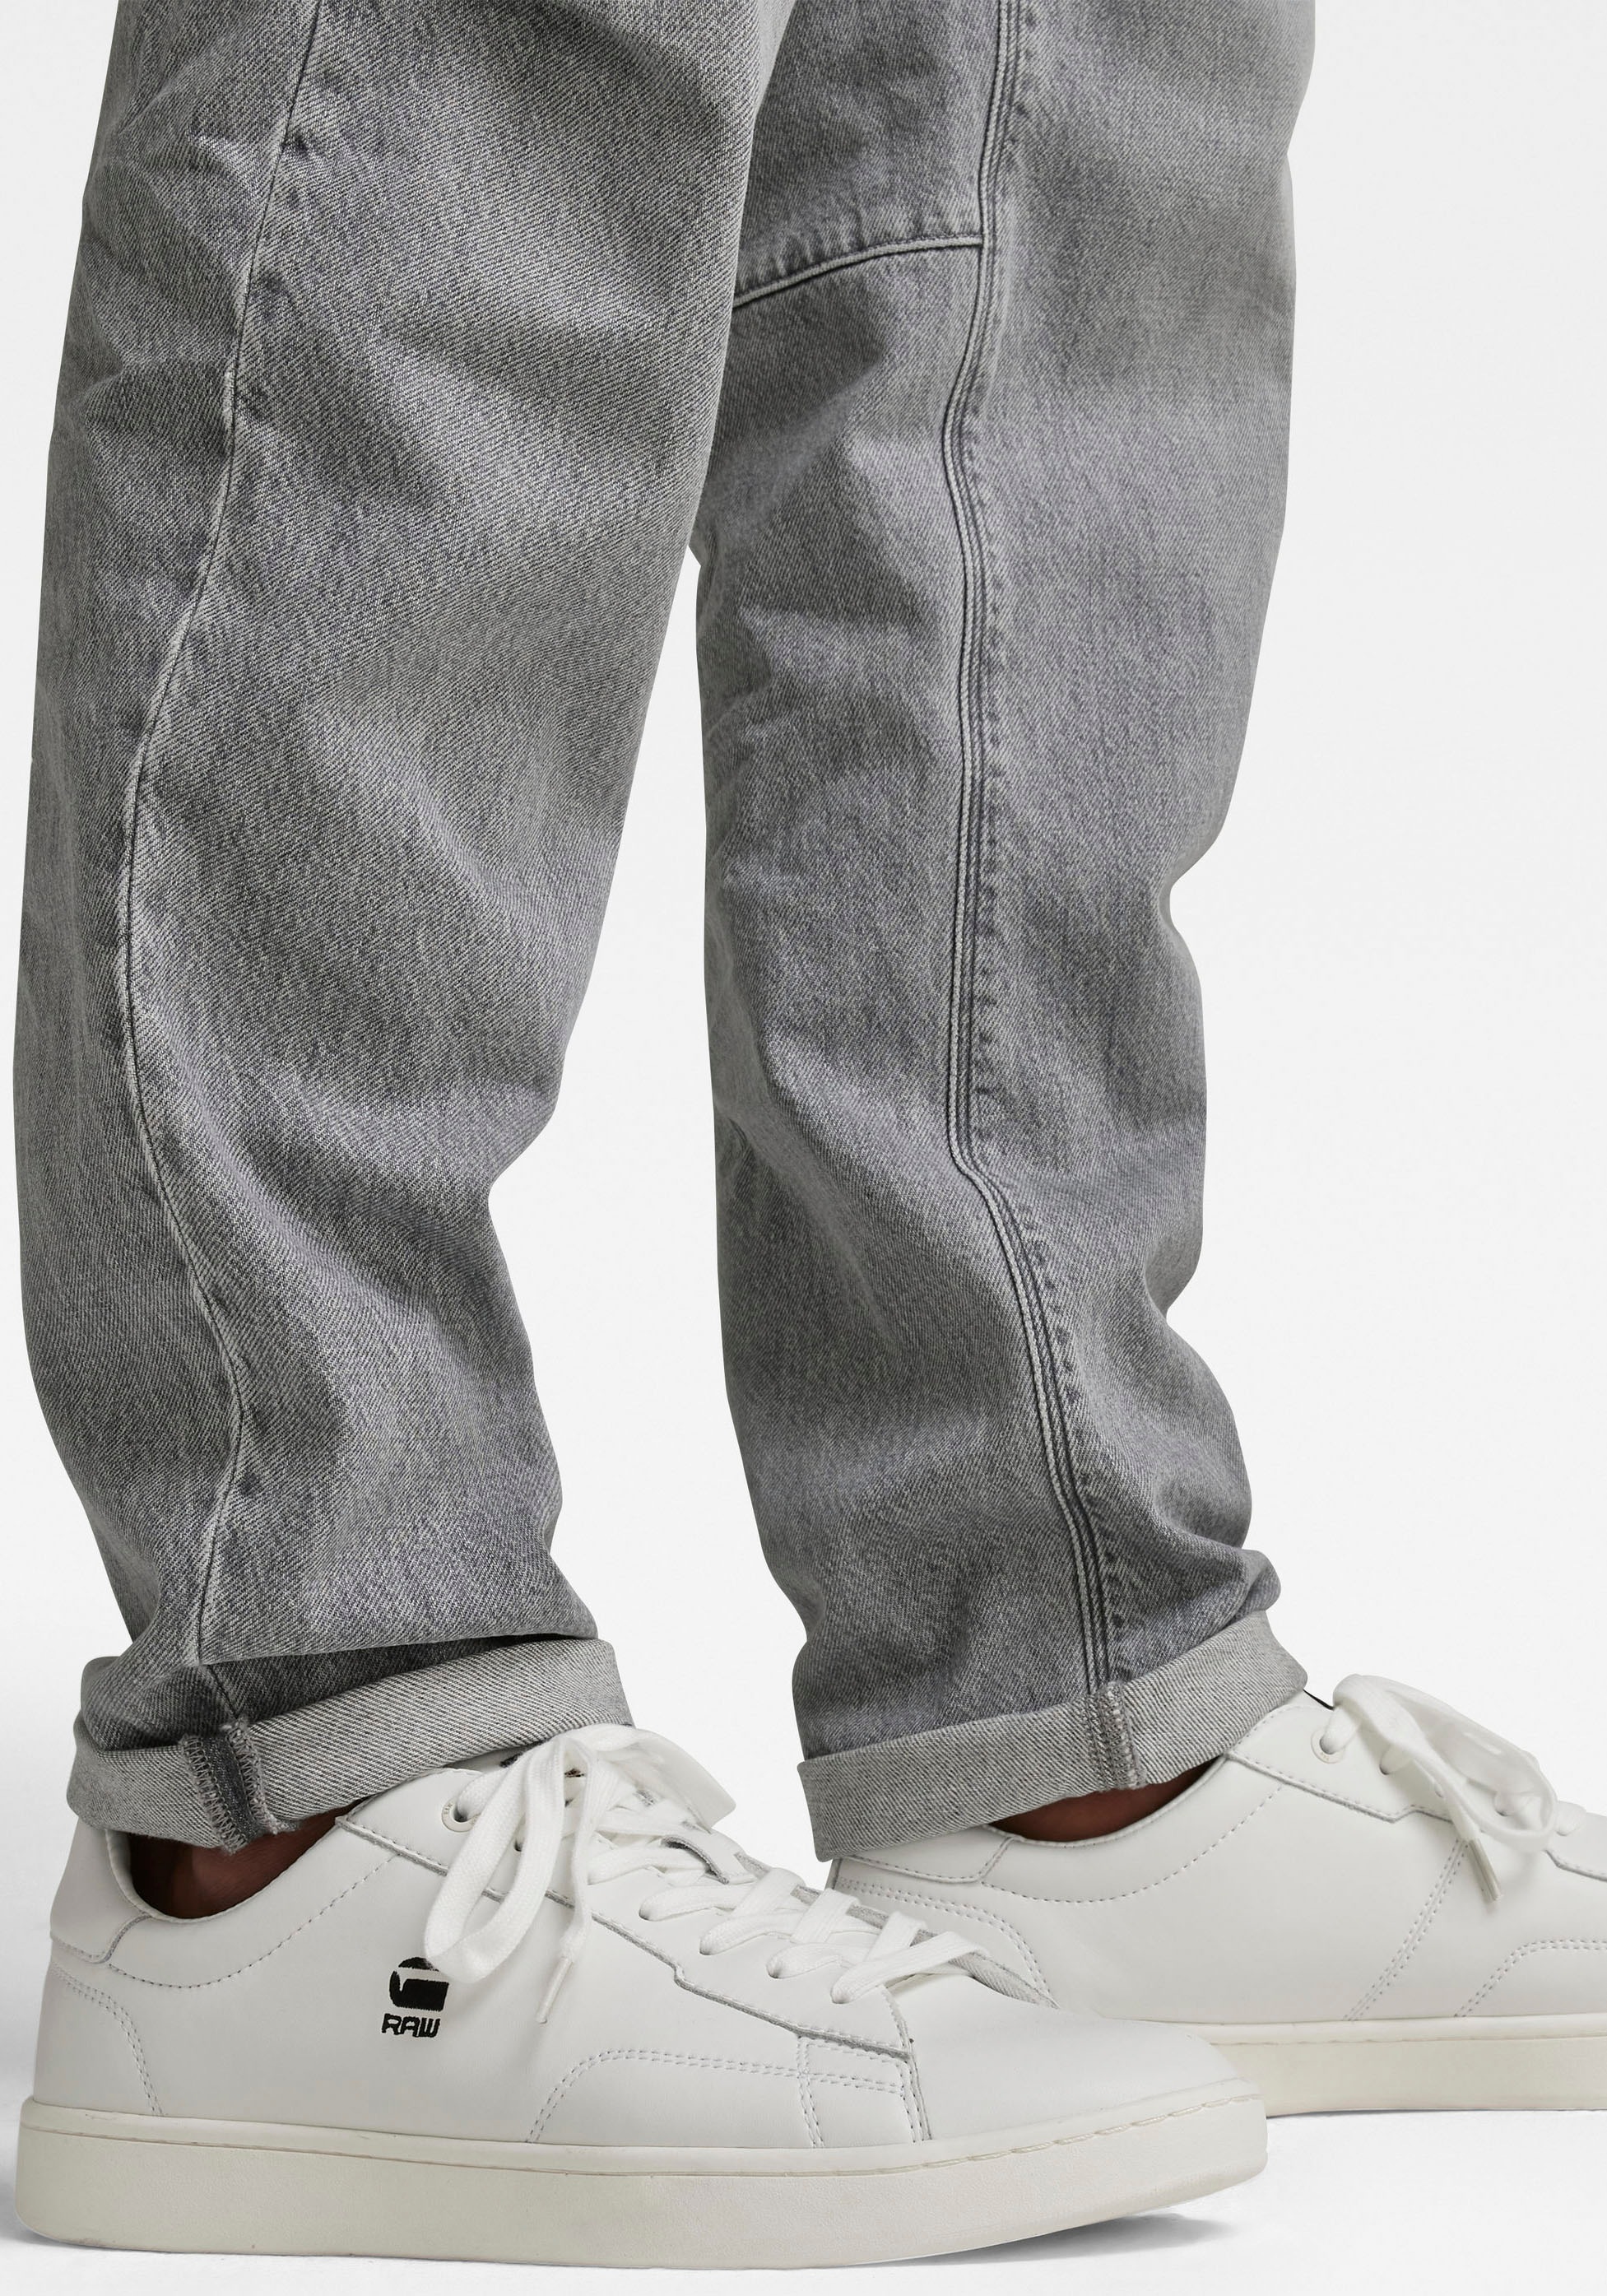 Grip RAW G-Star »Relaxed 3d« shoppen | Tapered Tapered-fit-Jeans online Jelmoli-Versand